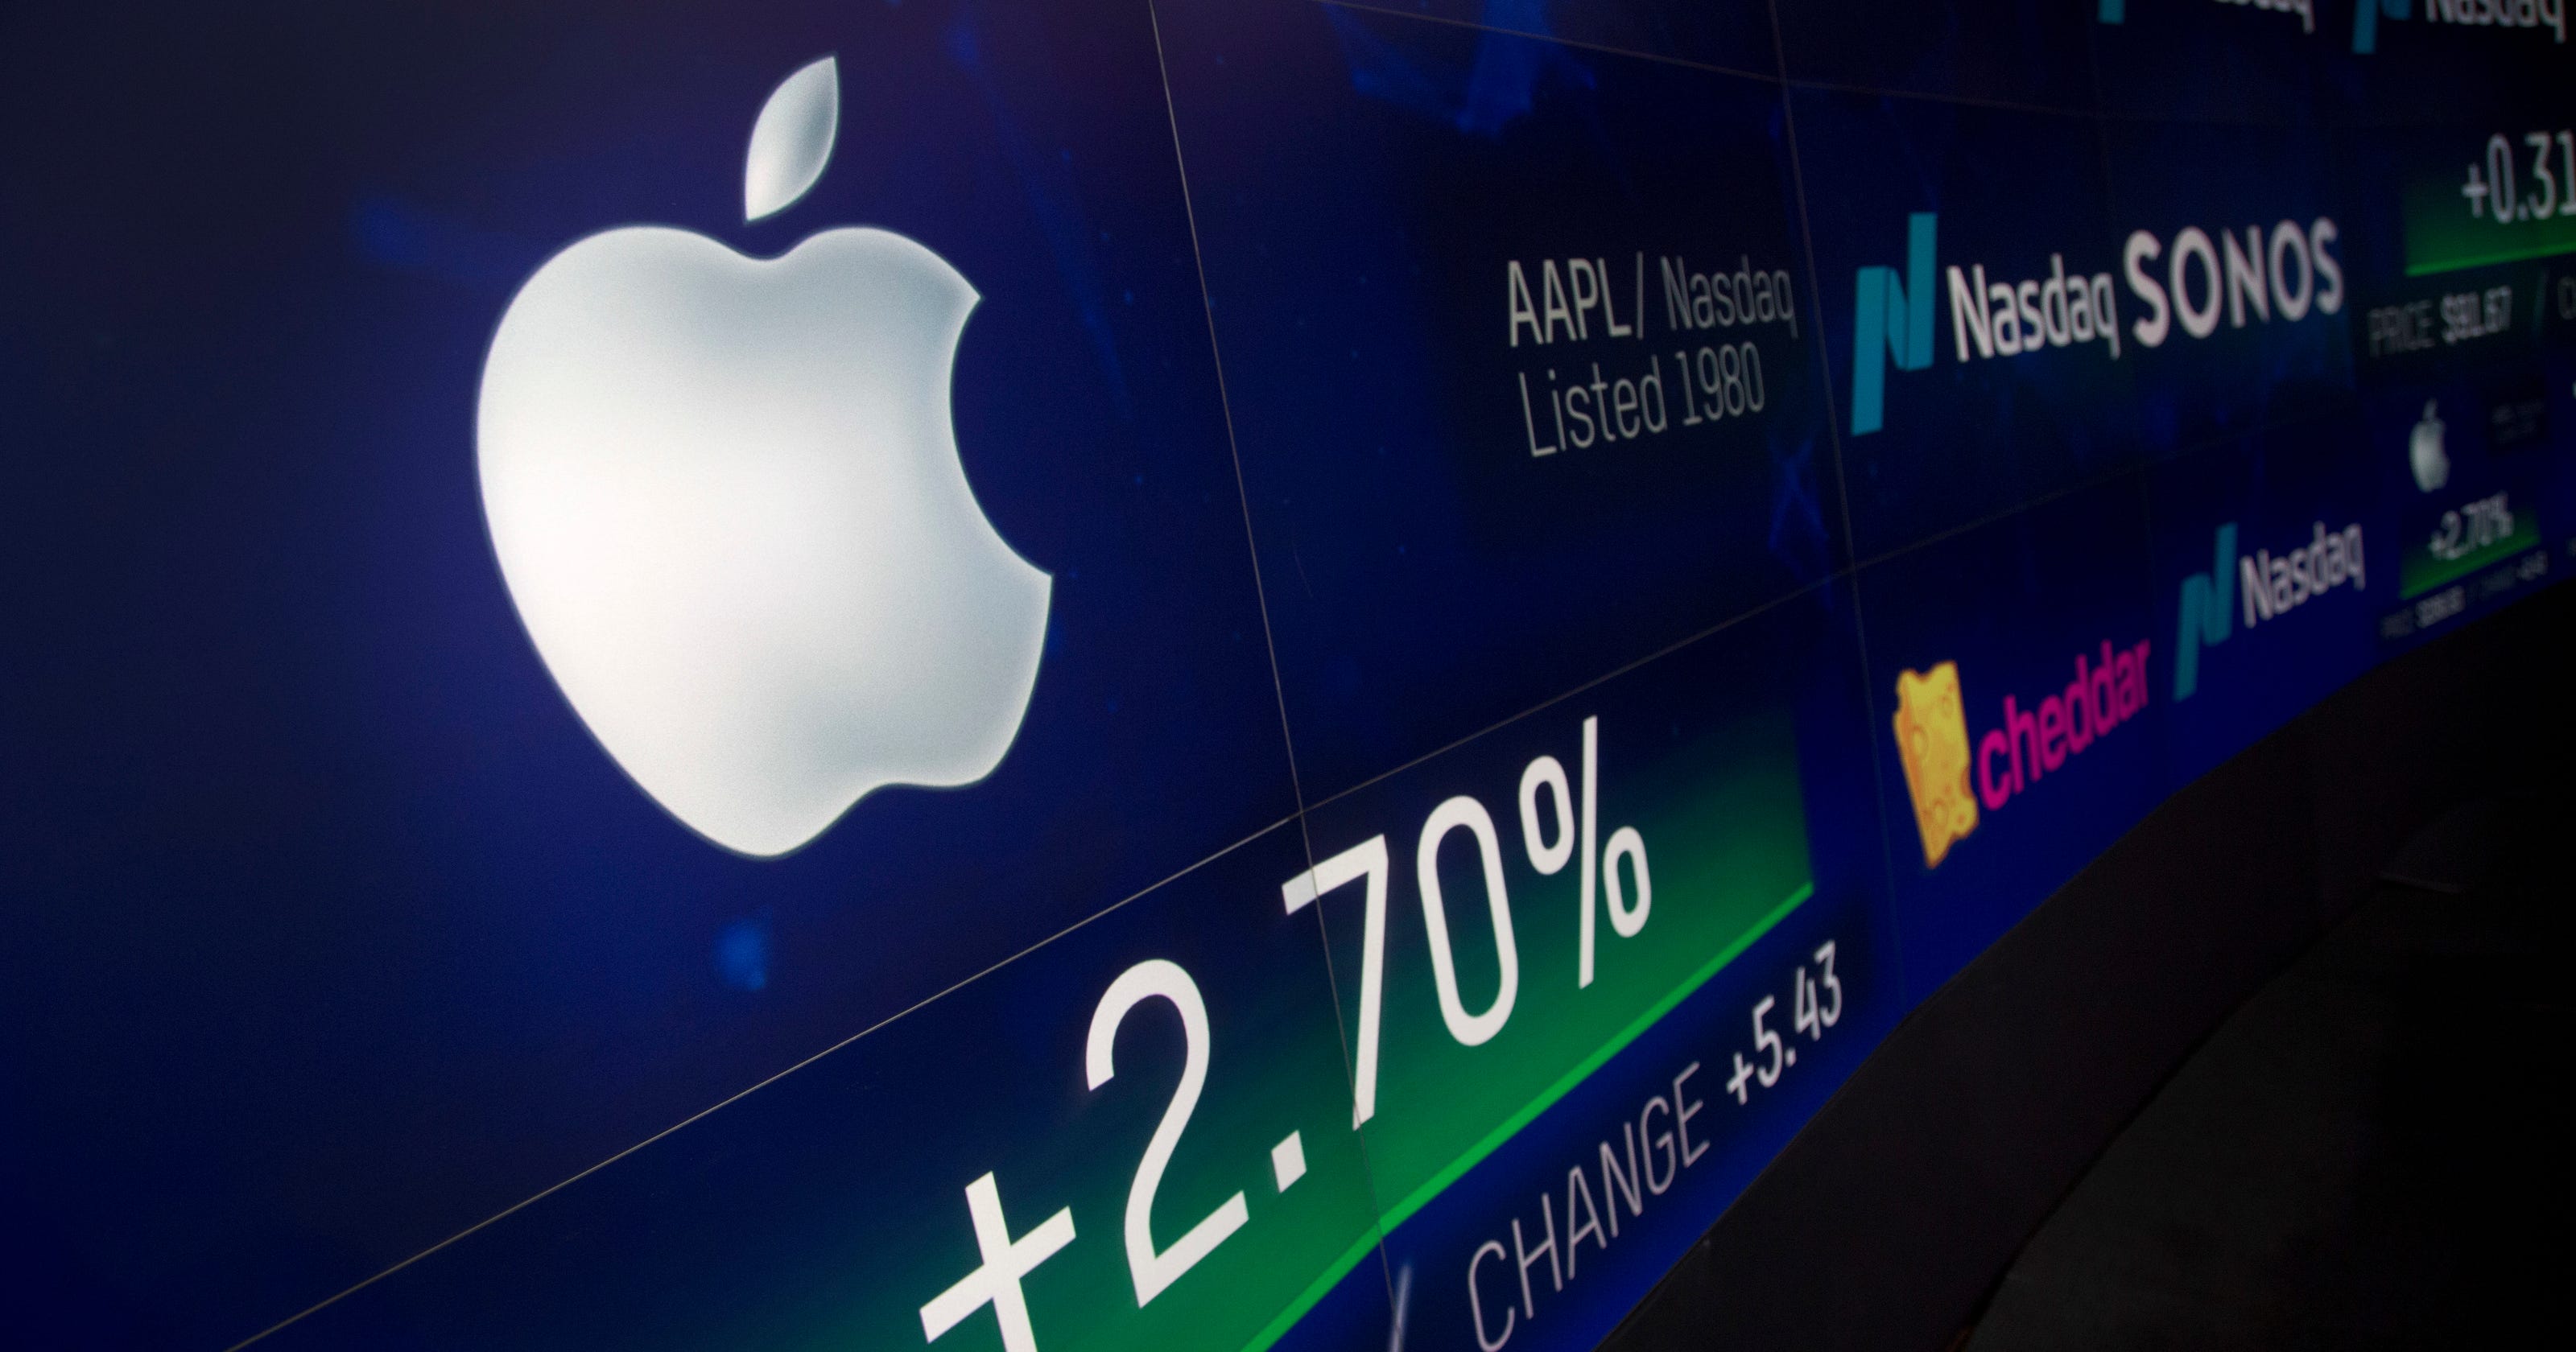 Amazon, Google and Microsoft are close to joining Apple in ...